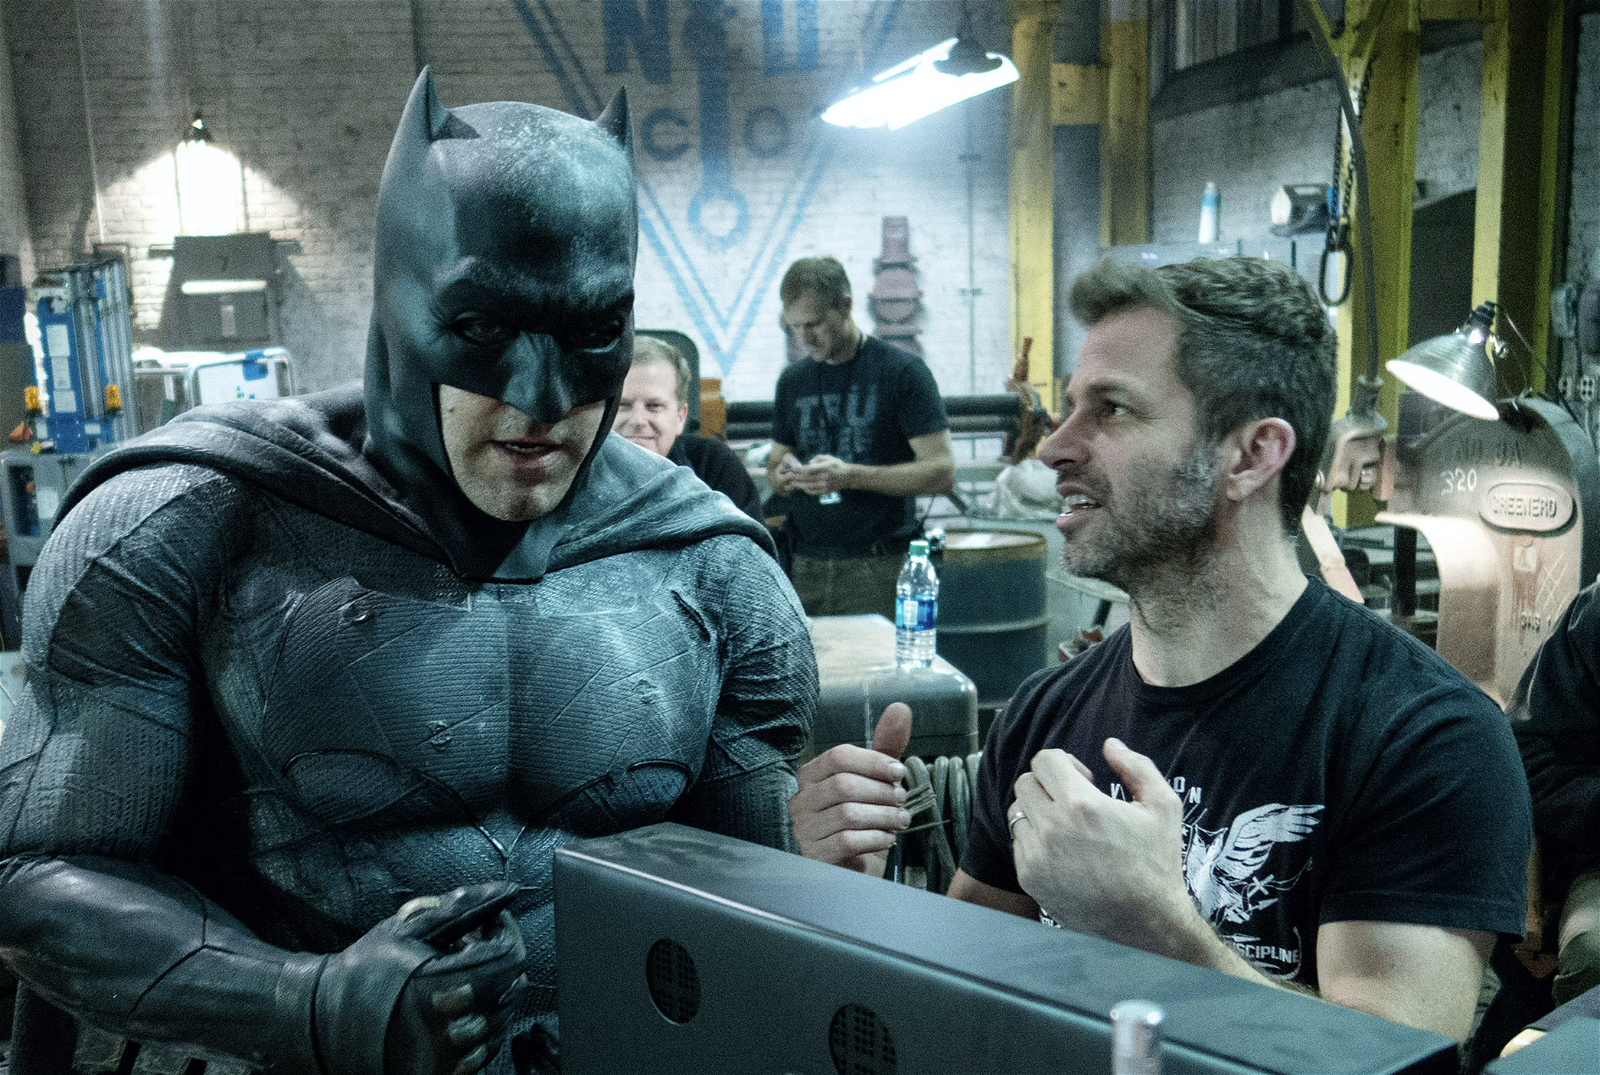 Zack Snyder directing the Snyder Cut